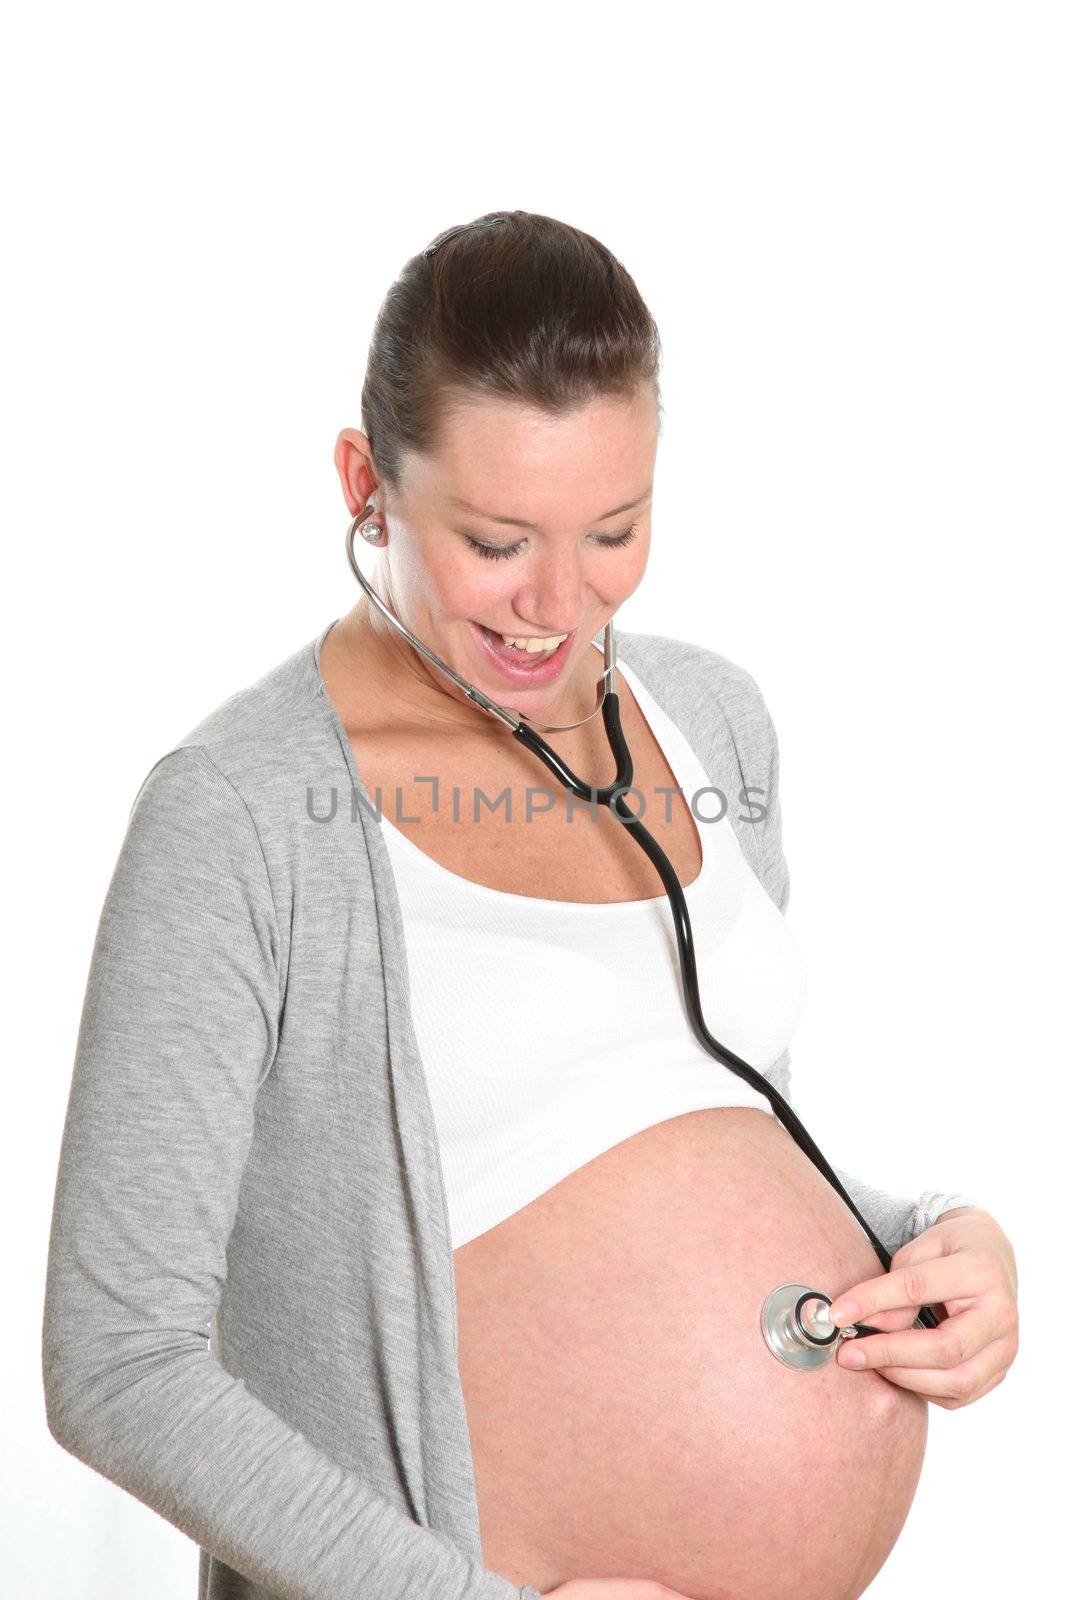 Happy, pregnant woman with stethoscope on belly by Farina6000